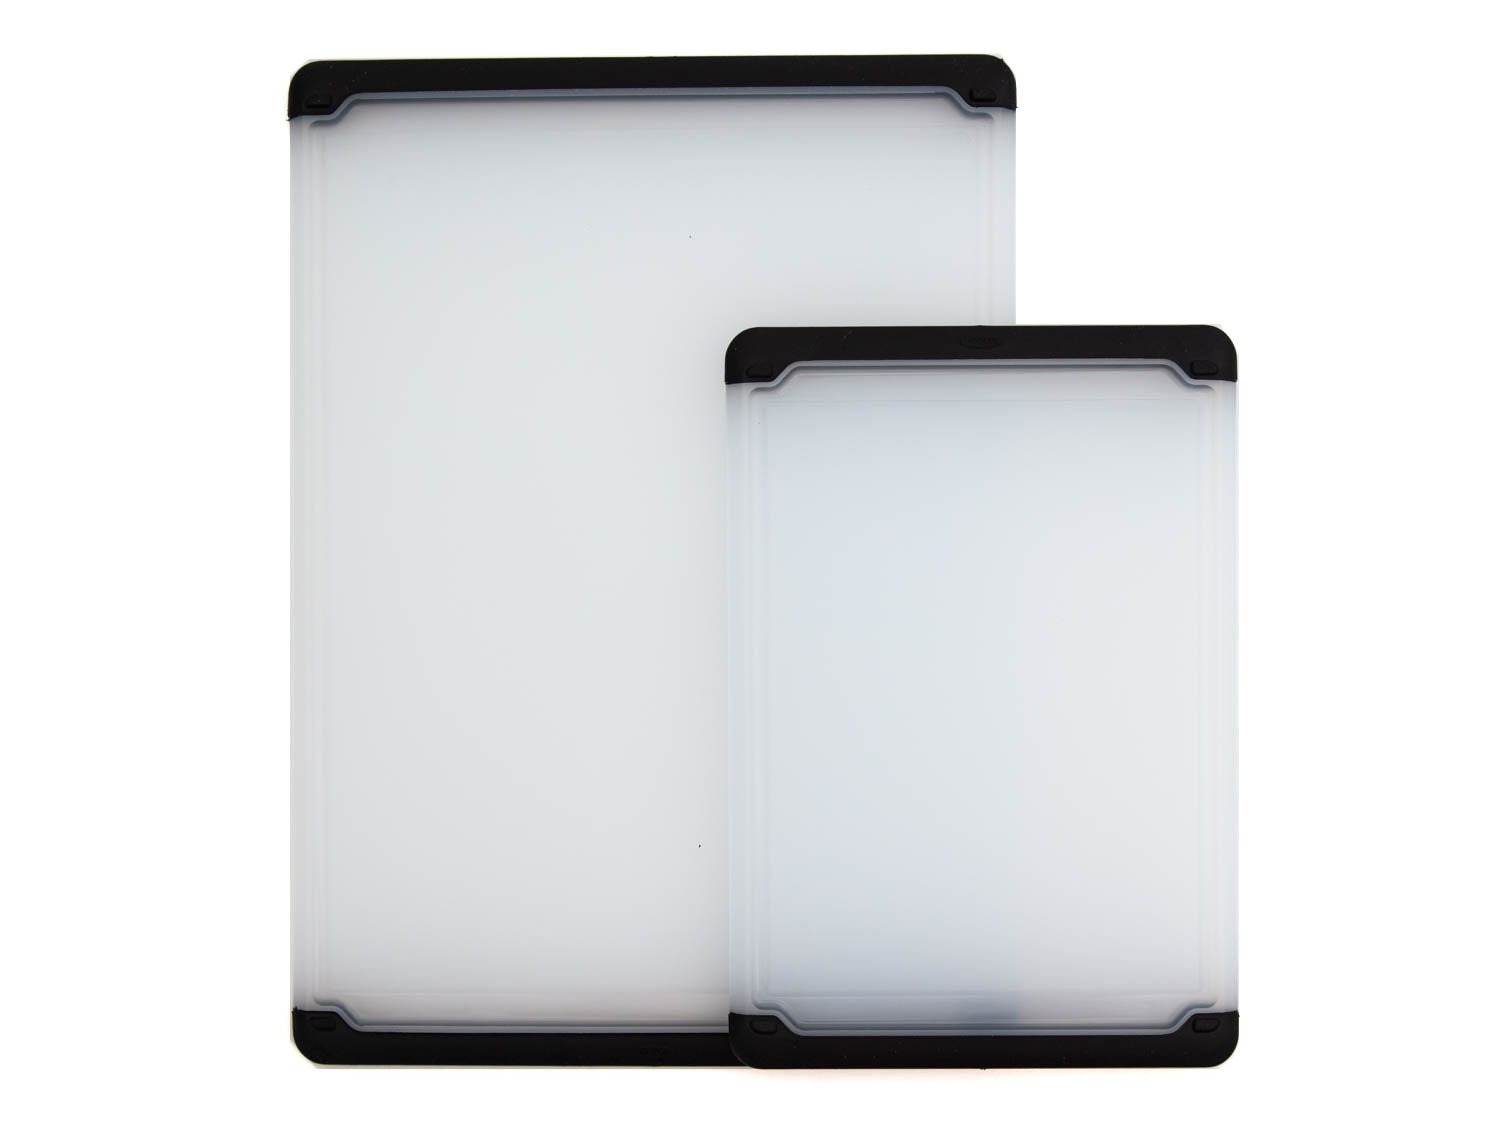 Oxo's plastic cutting board come in three sizes, but only the small and medium (shown here) can be purchased as a pair.